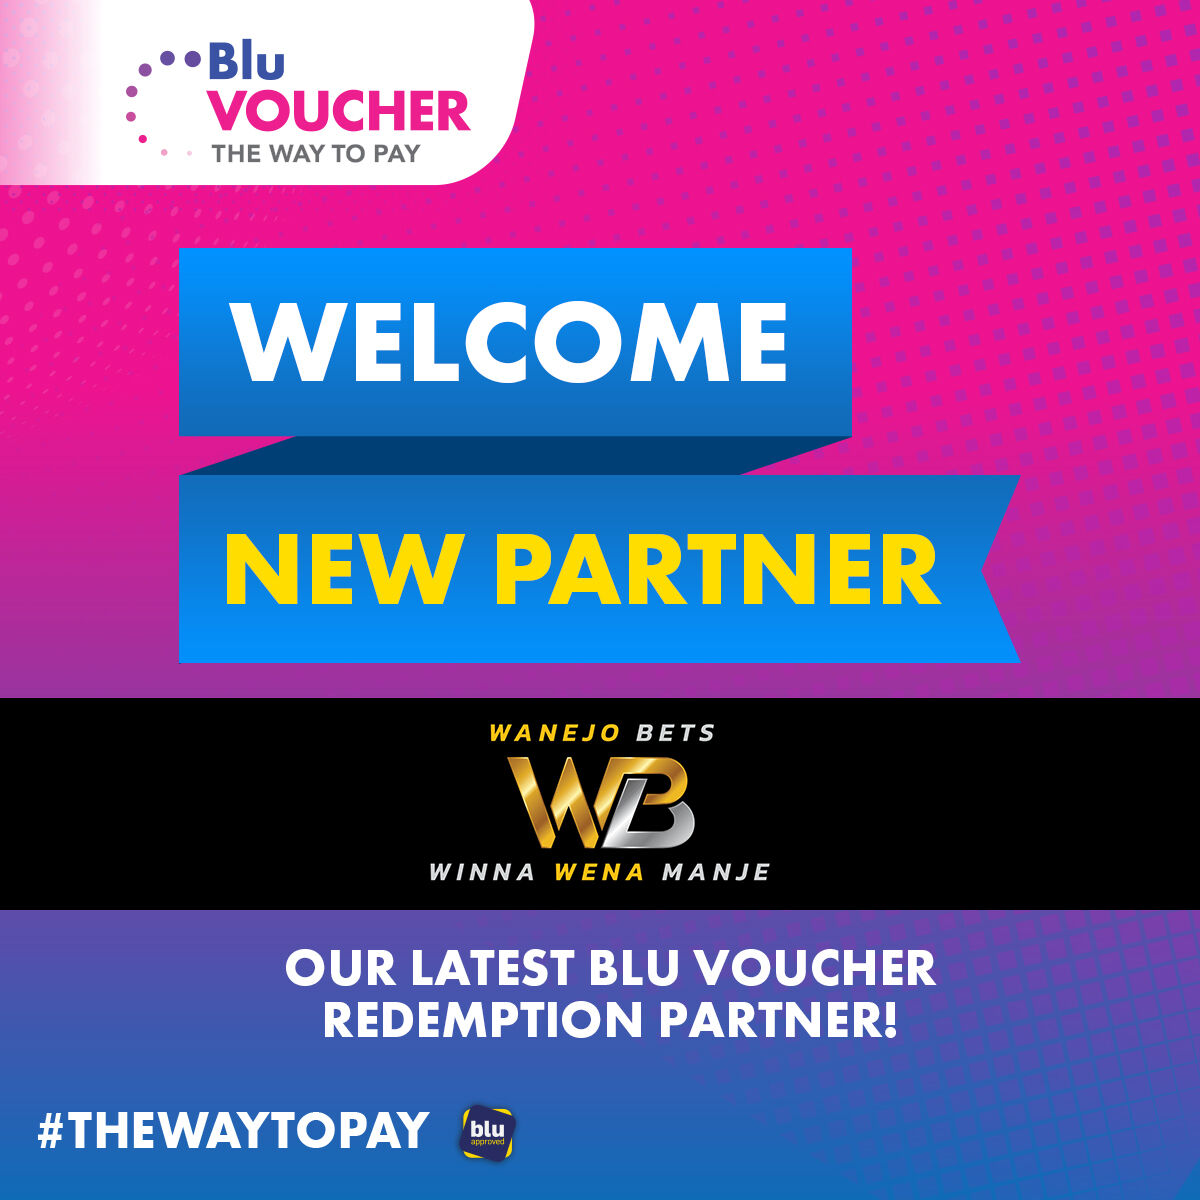 We're thrilled to share some exciting news with you all! It's official - Wanejo Bets has become a valued member of the Blu Voucher family.  #WanejoBets #BluVoucher #ExcitingNews